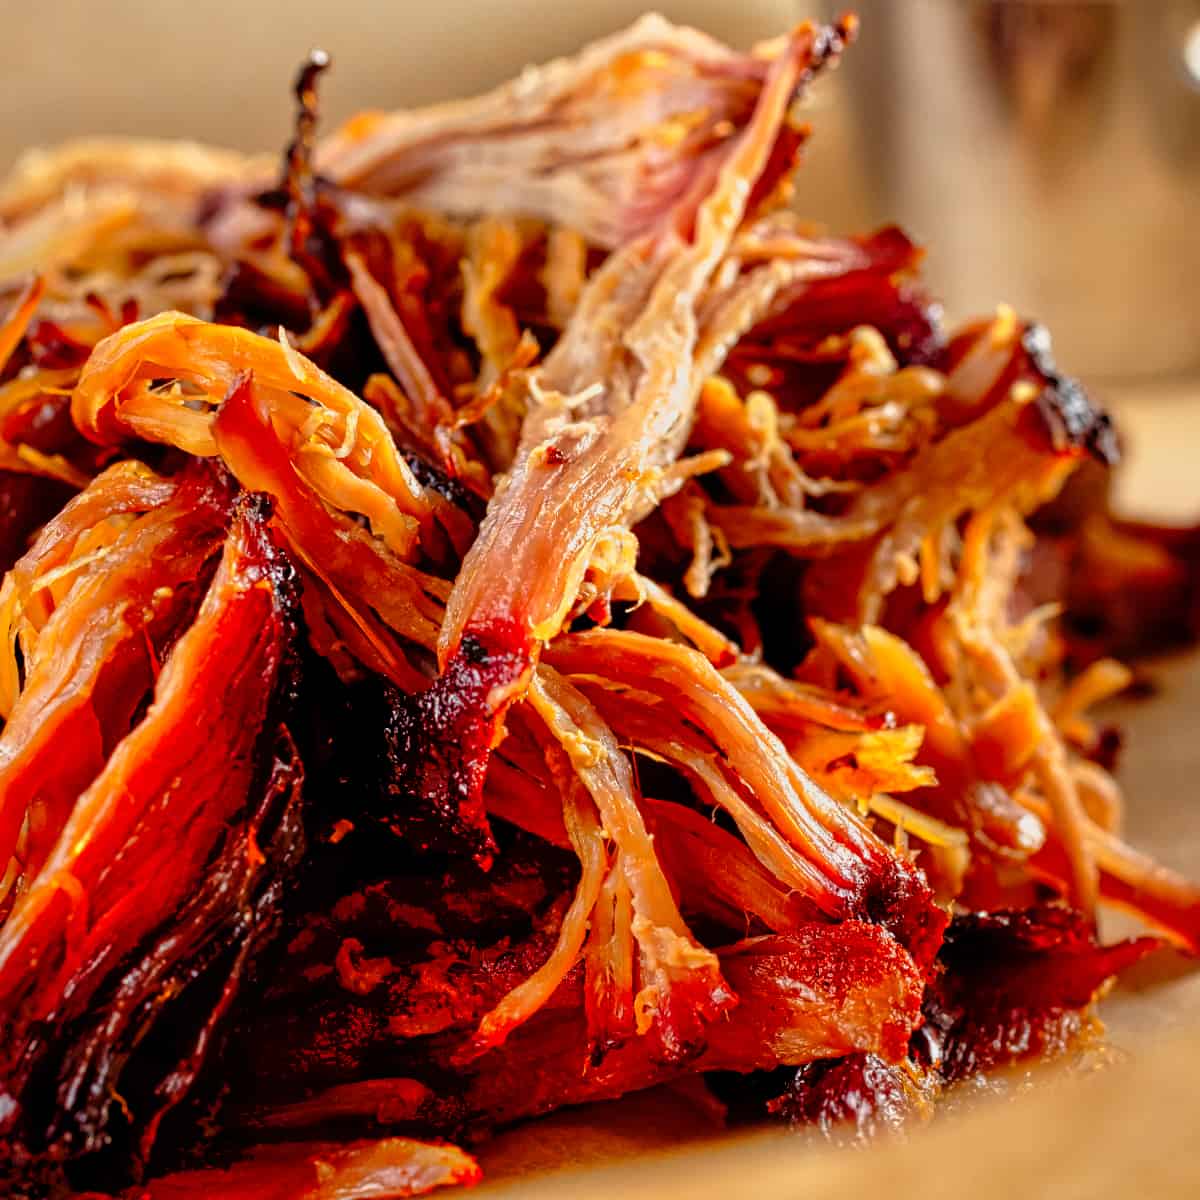 2. Slow Cooker Pulled Pork and Roasted Vegetables - AIP crock pot recipes